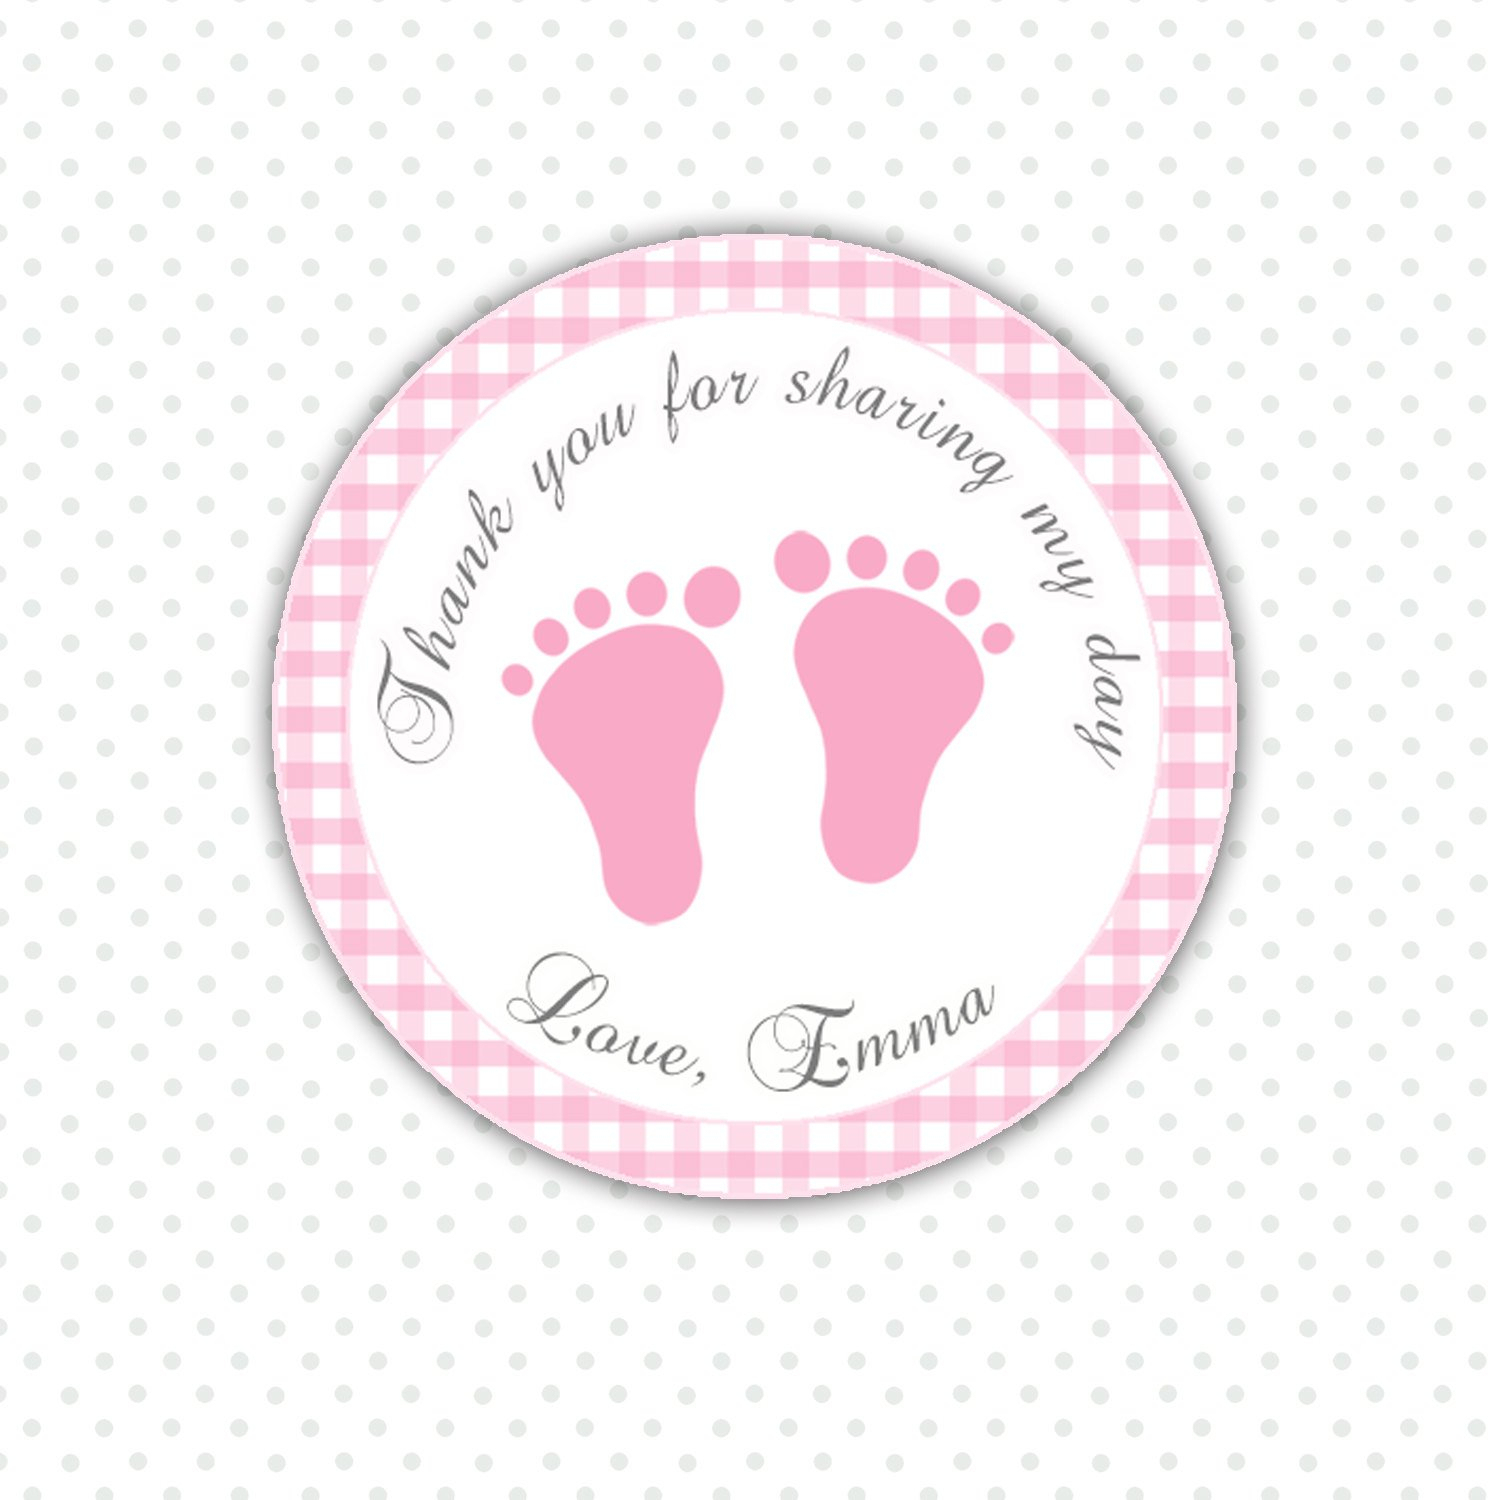 Free Printable Baby Shower Favor Stickers - Baby Shower Ideas - Free Printable Baby Shower Favor Tags Template